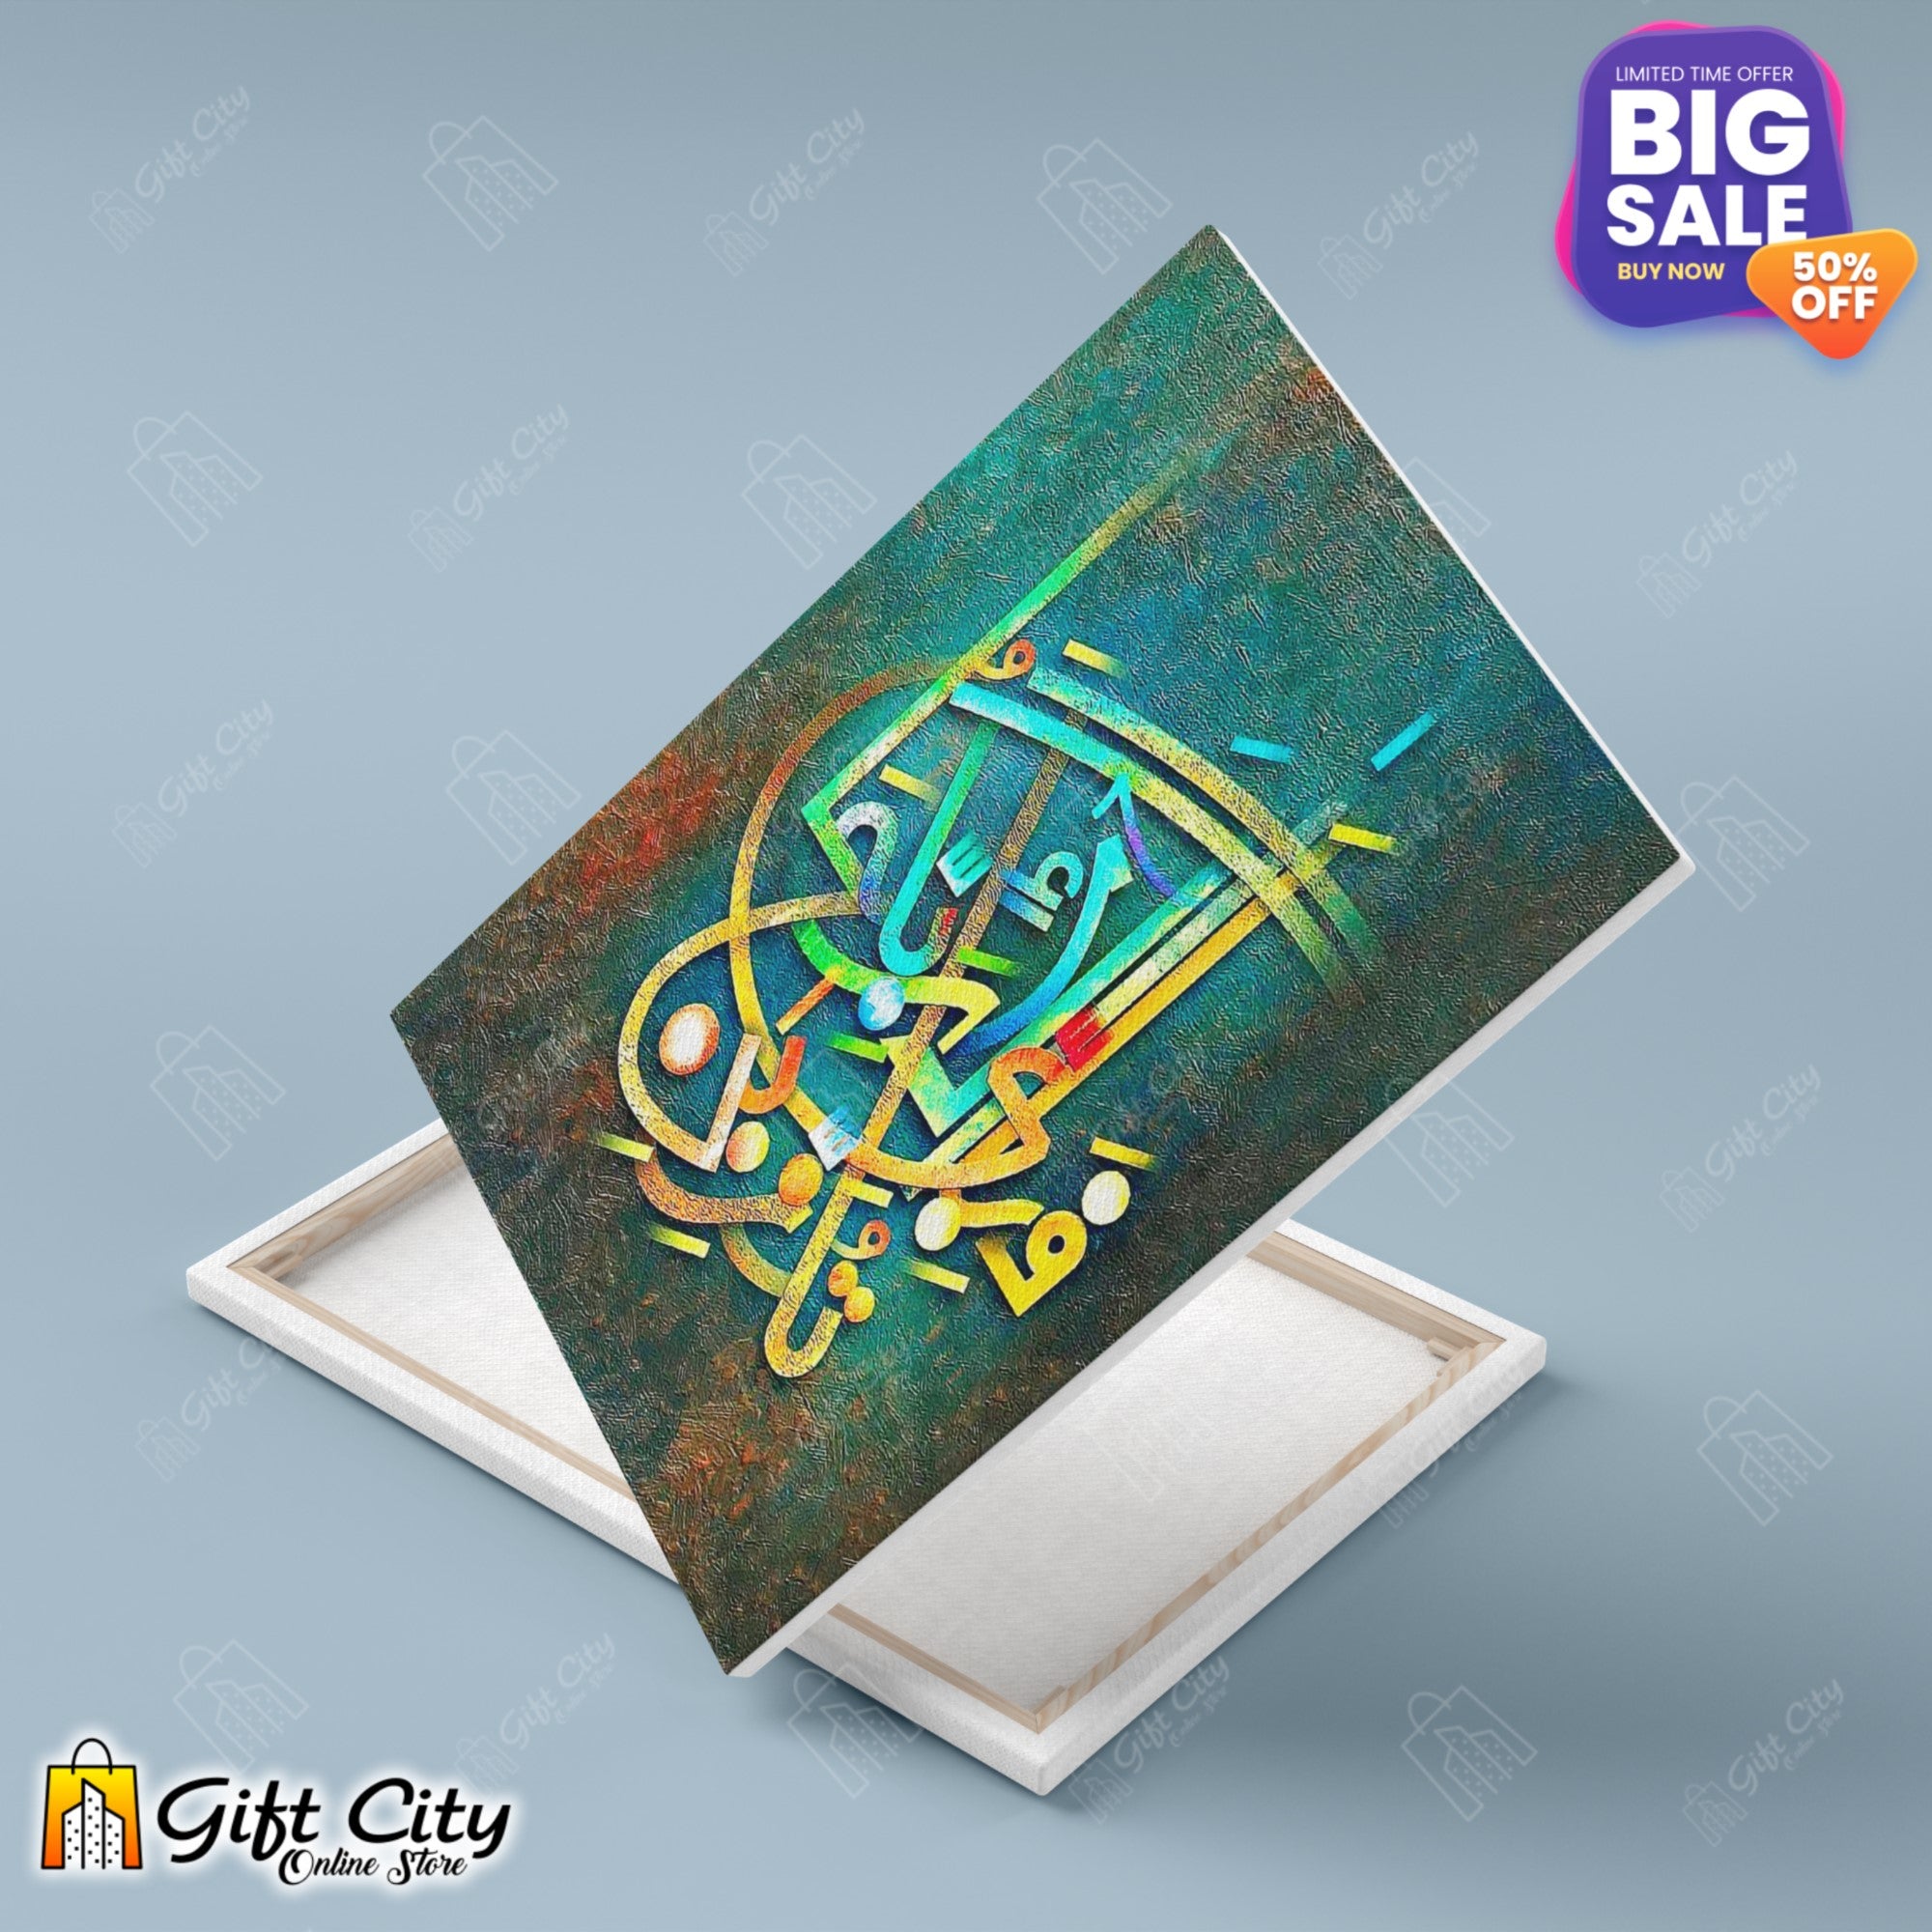 Islamic Calligraphy Canvas Painting 